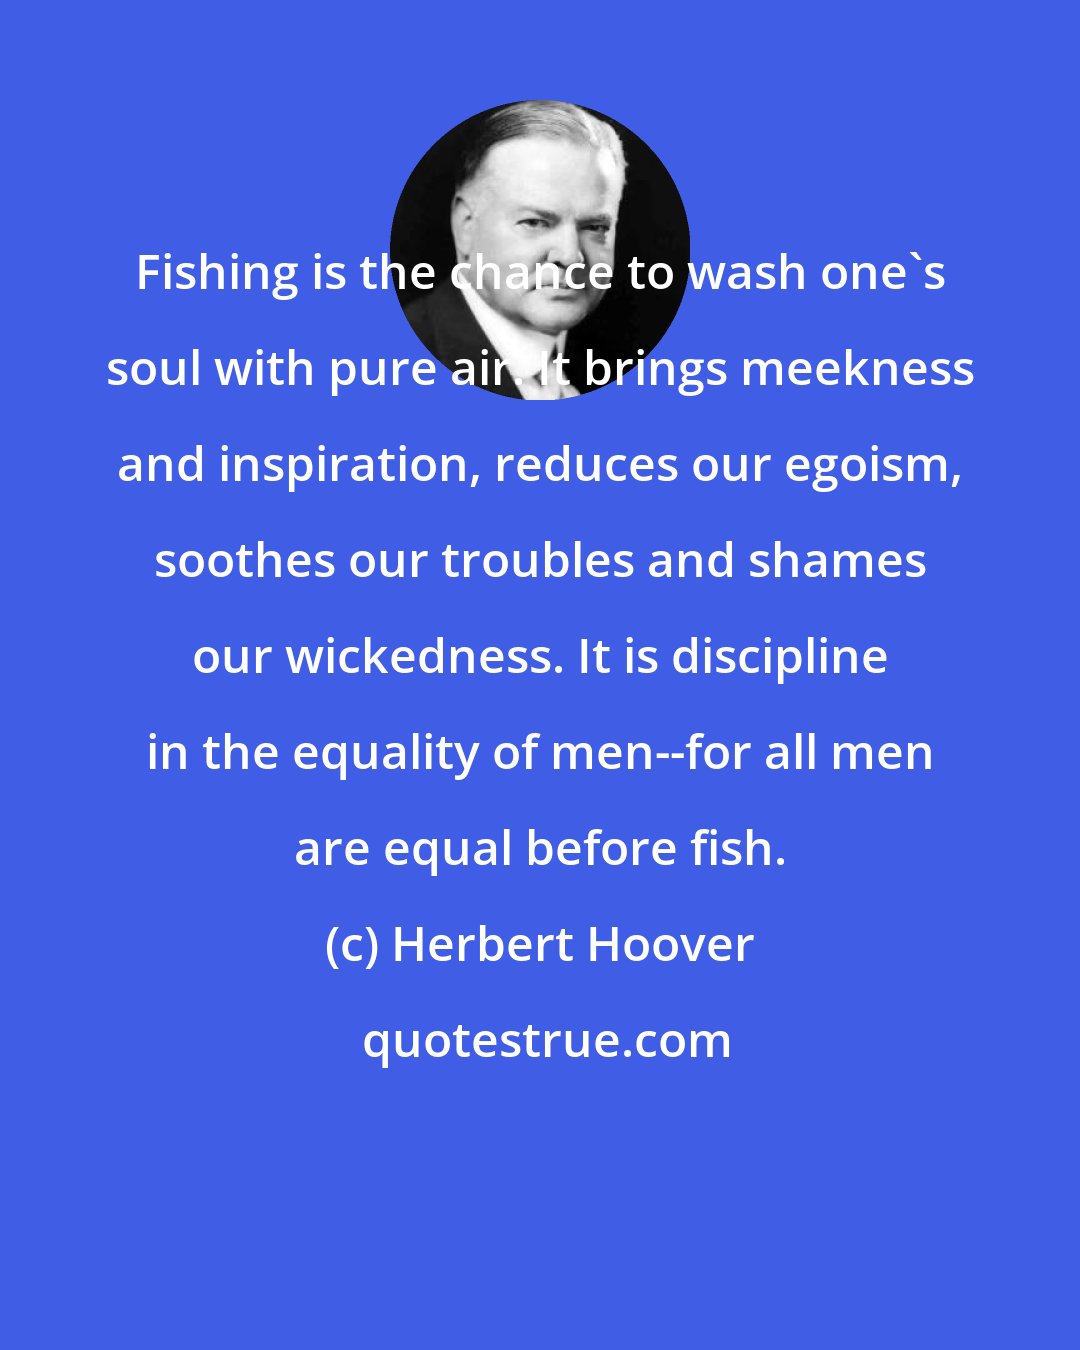 Herbert Hoover: Fishing is the chance to wash one's soul with pure air. It brings meekness and inspiration, reduces our egoism, soothes our troubles and shames our wickedness. It is discipline in the equality of men--for all men are equal before fish.